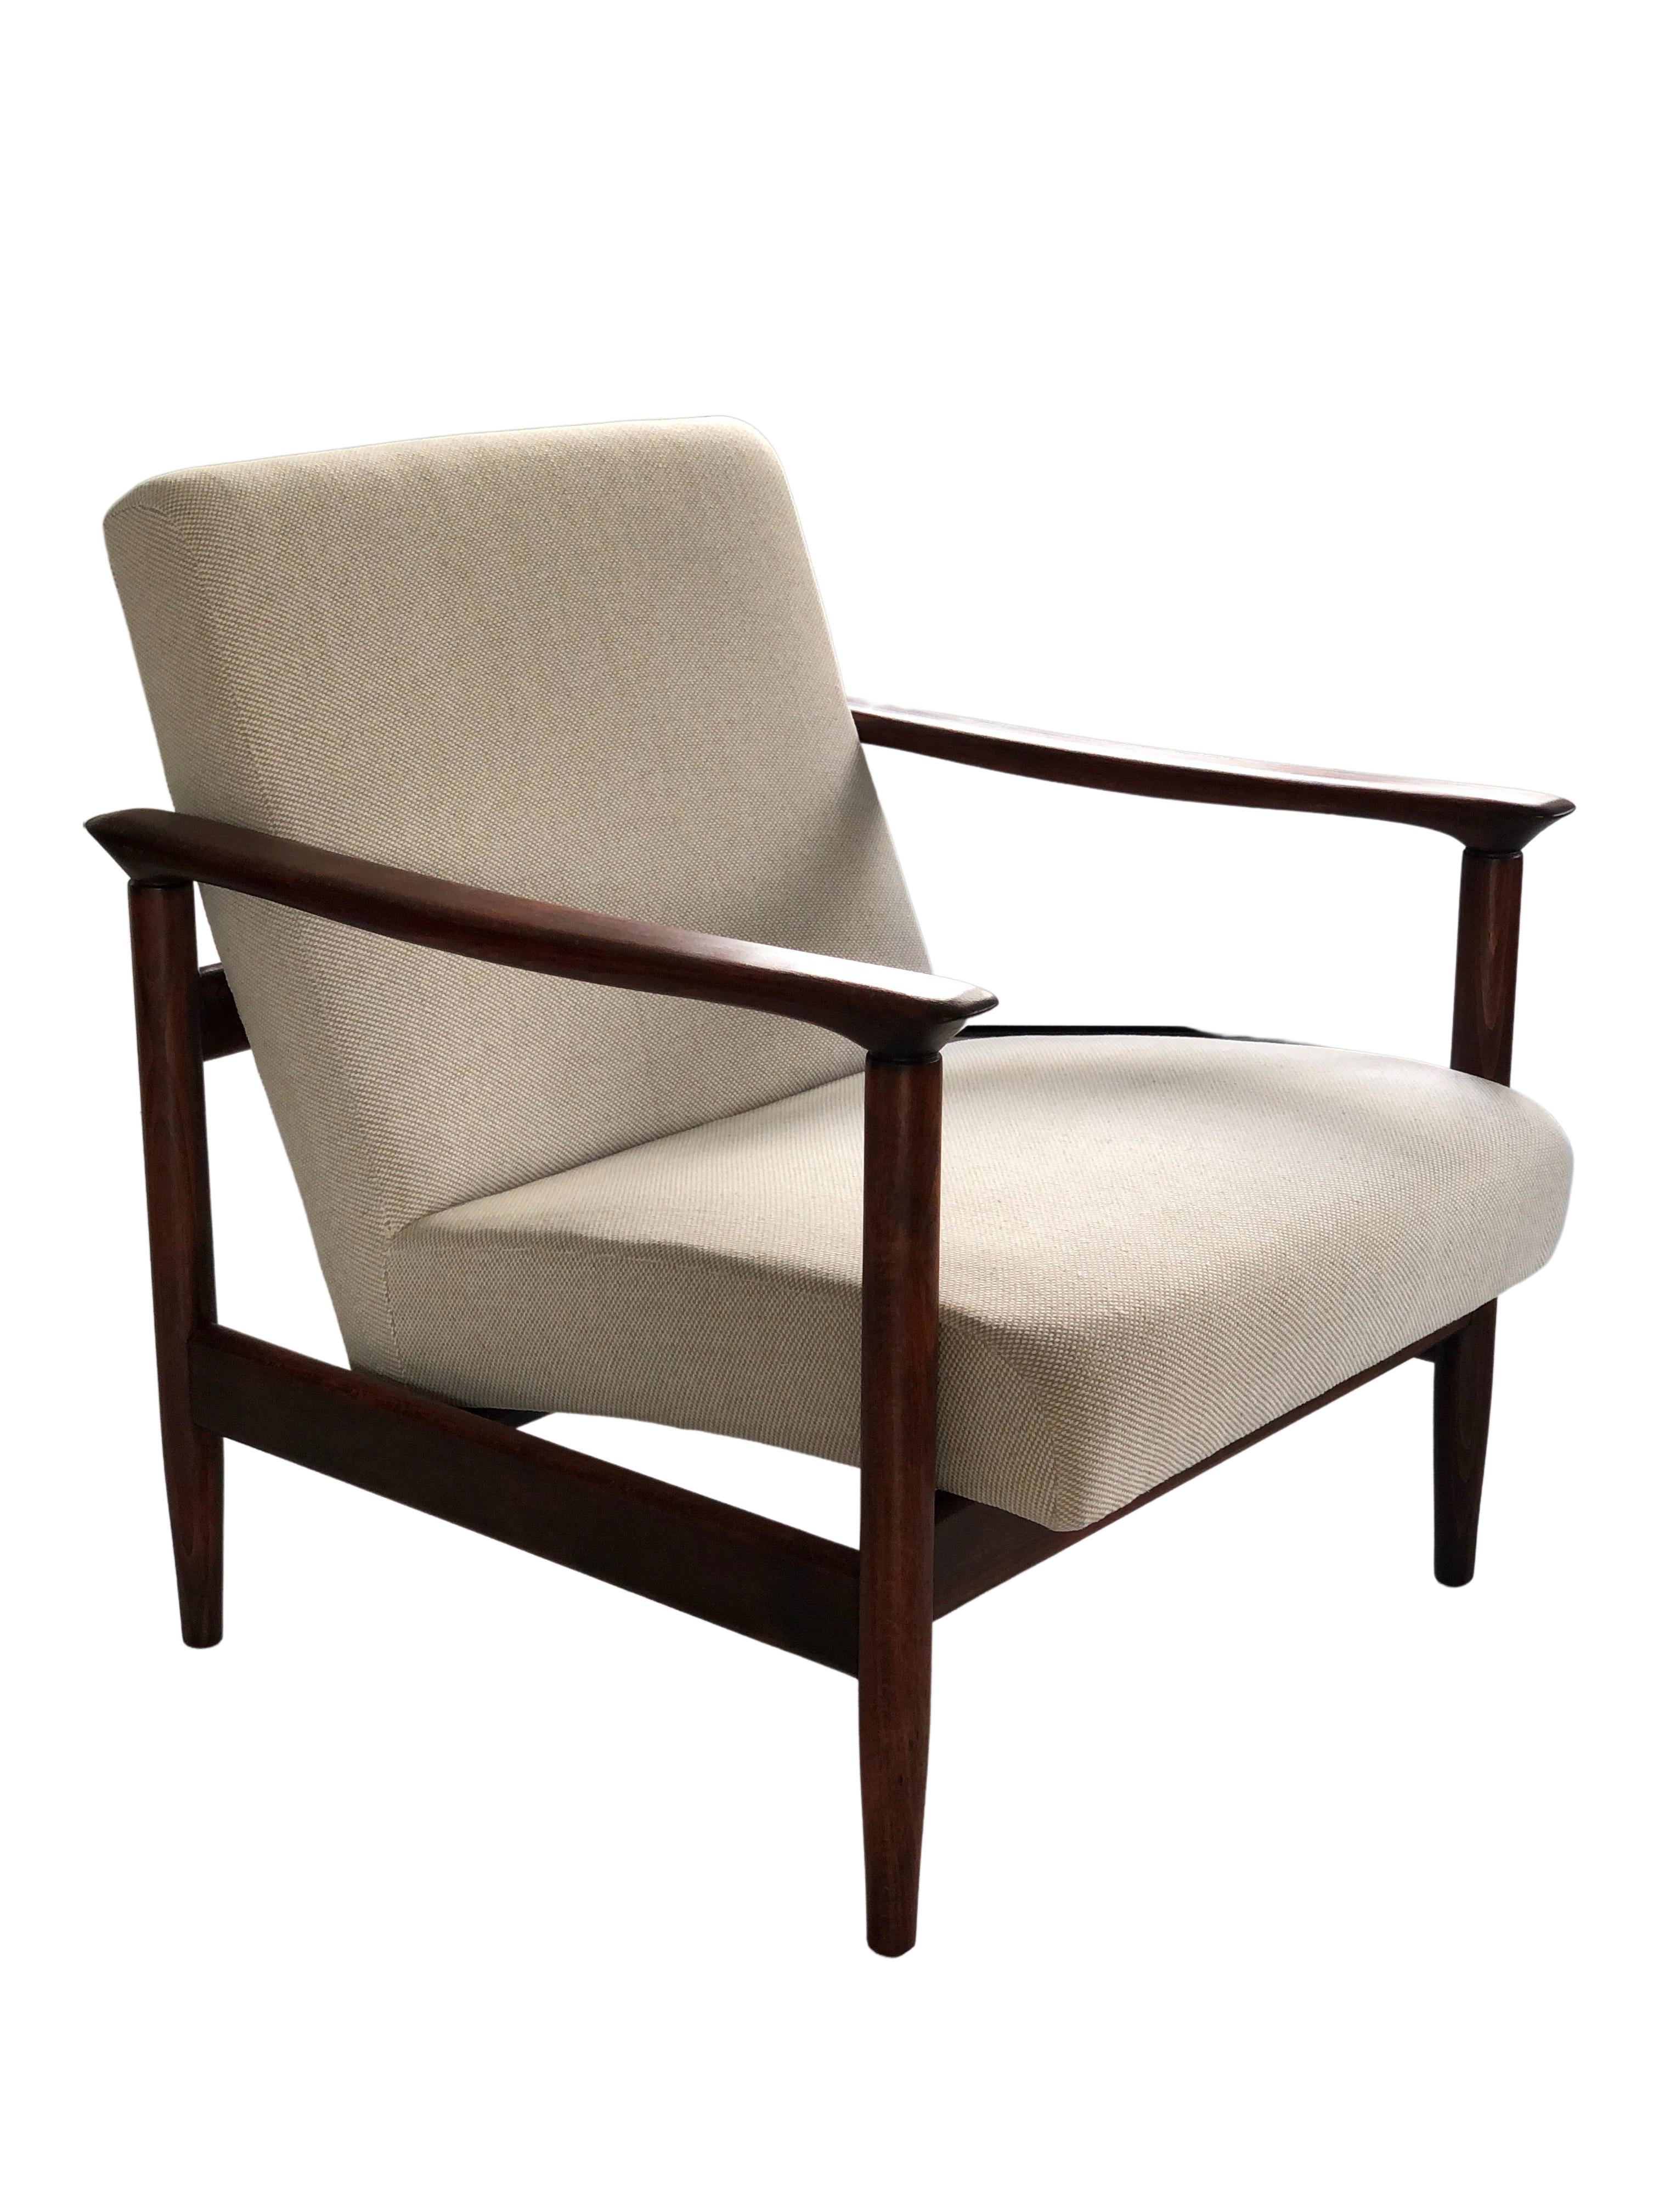 One of the icon of Polish mid-century design, a pair of beige armchairs, designed by Edmund Homa - Polish architect, industrial and interior design designer, professor at the Academy of Fine Arts in Gdansk. The set has been manufactured by